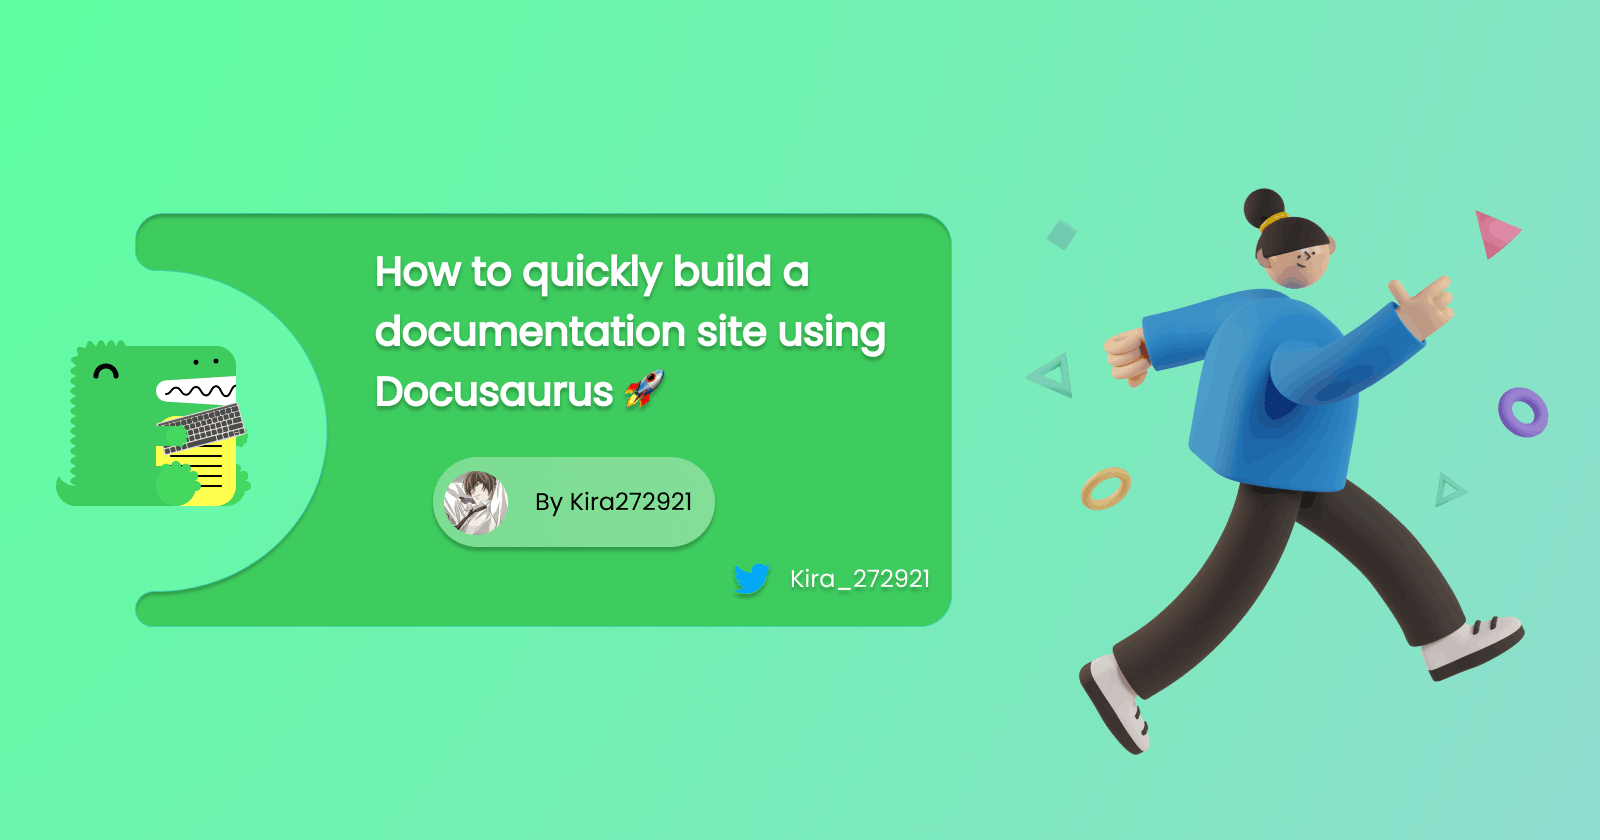 How to quickly build a documentation site using Docusaurus 🚀